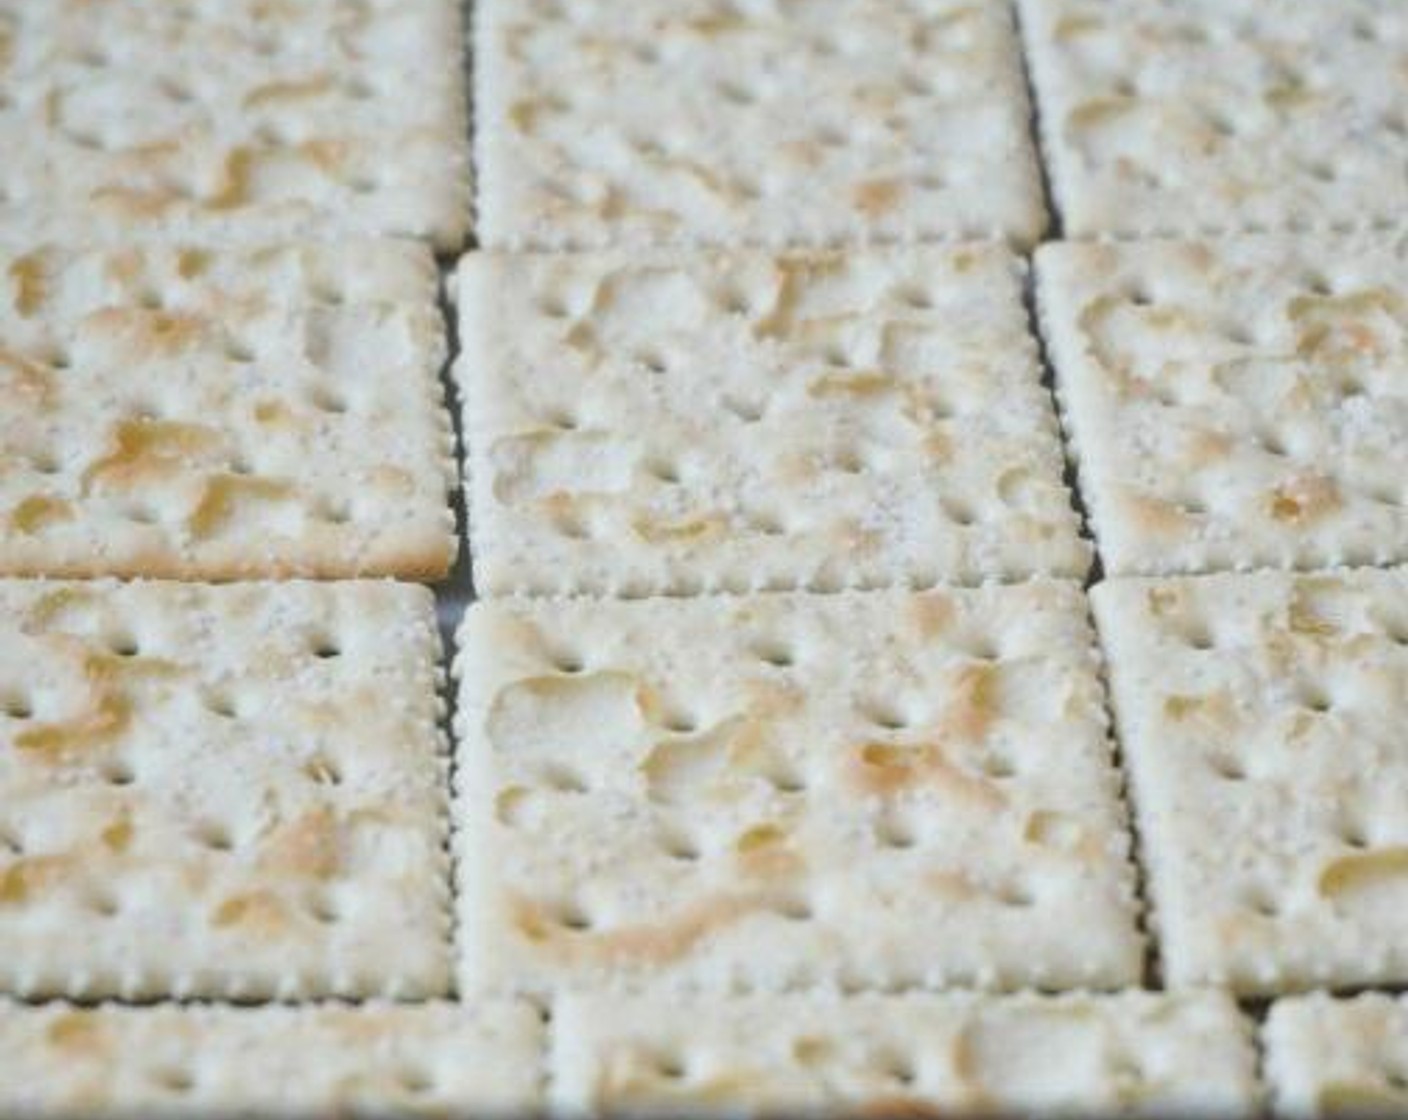 step 2 Lay parchment paper in a 9x13-inch baking dish. Add the Saltine Crackers (30) in one layer to the bottom of the dish for the crust.